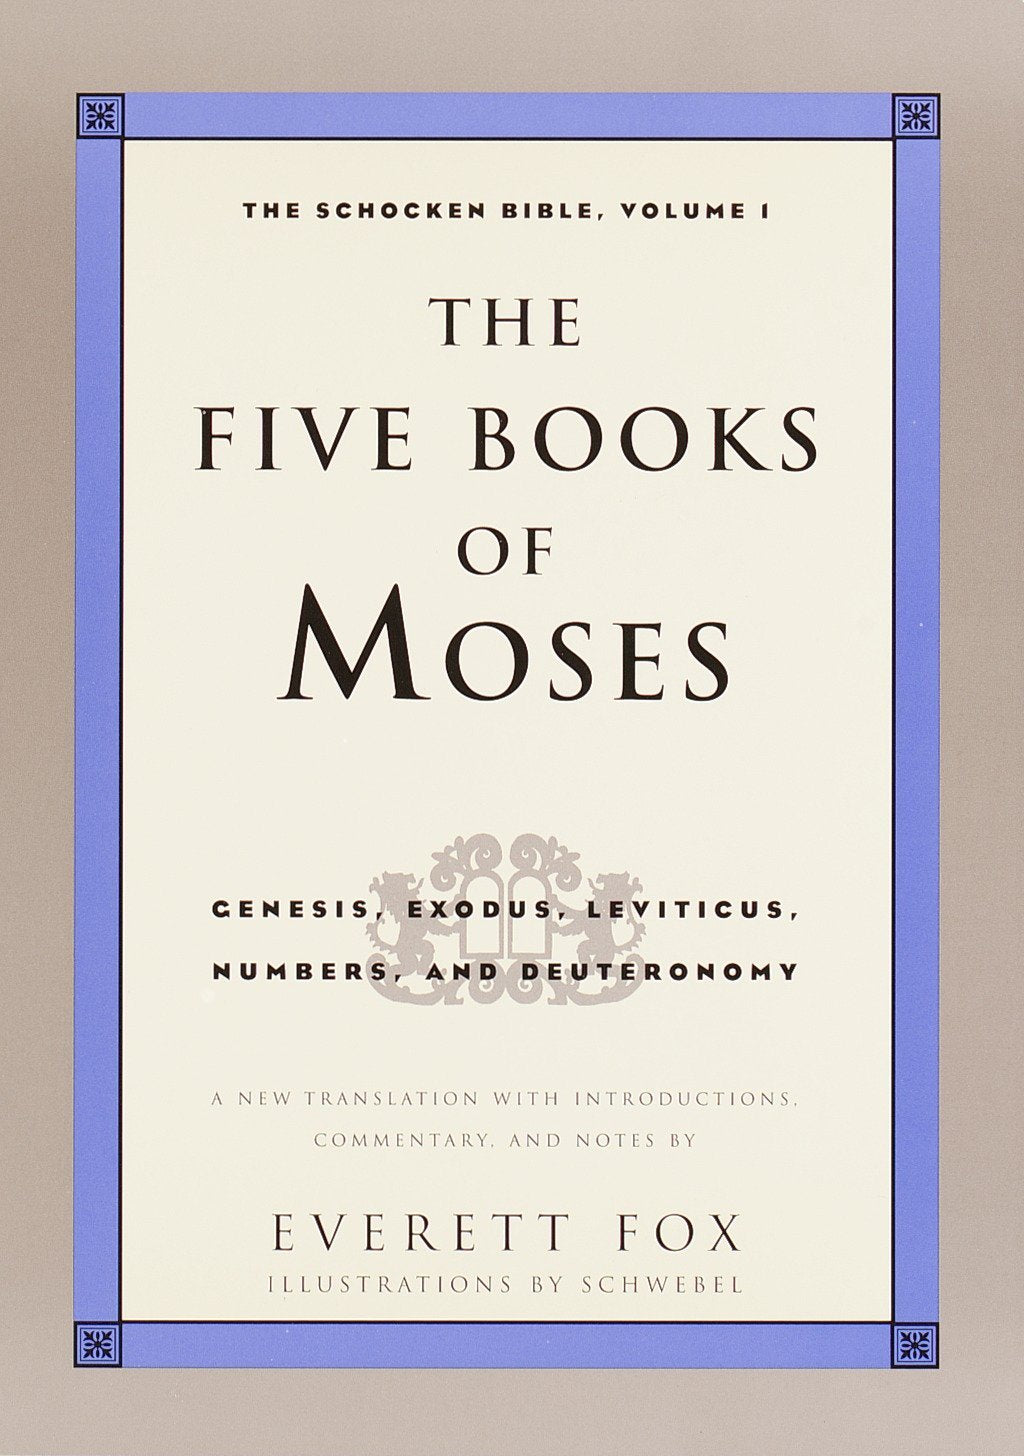 THE FIVE BOOKS OF MOSES-A NEW TRANSLATION WITH INTRODUCTIONS, COMENTARY, AND NOTES BY  EVERETT FOX